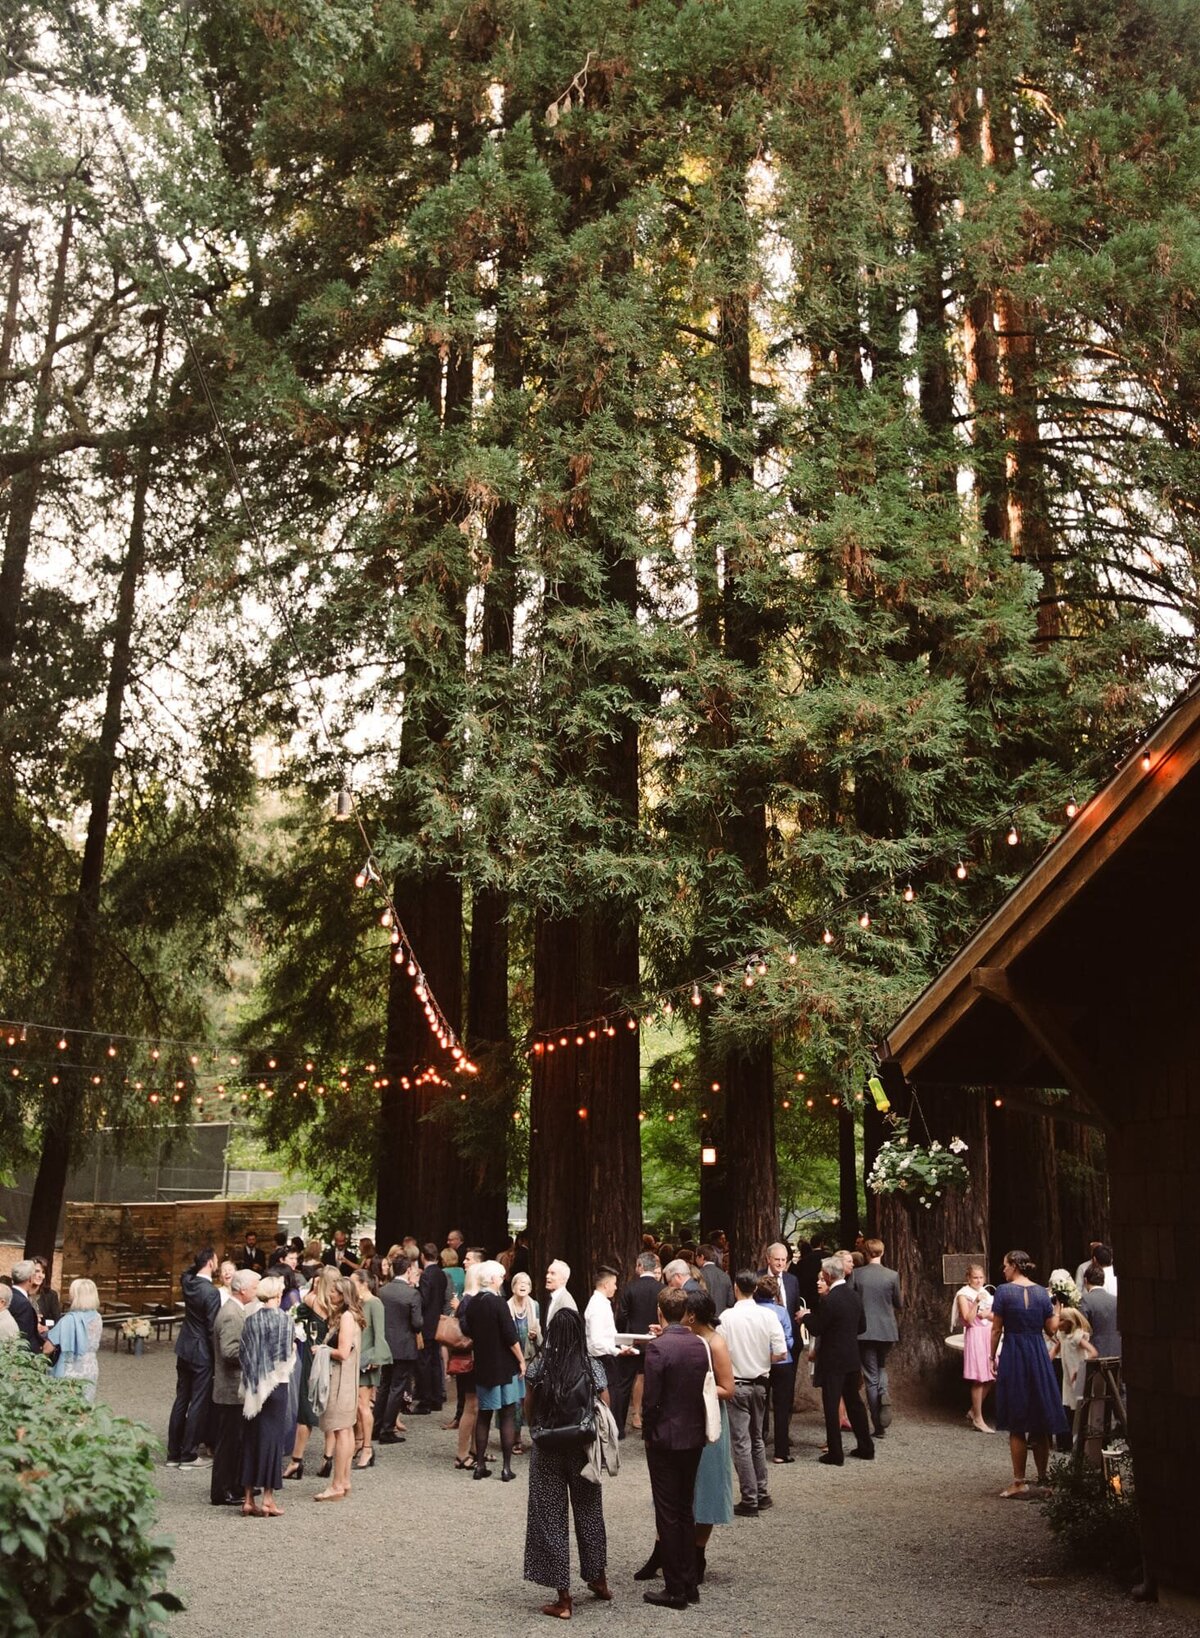 Wedding guests enjoy a magical evening filled with laughter, love, and gratitude amidst giant fir and pine trees.